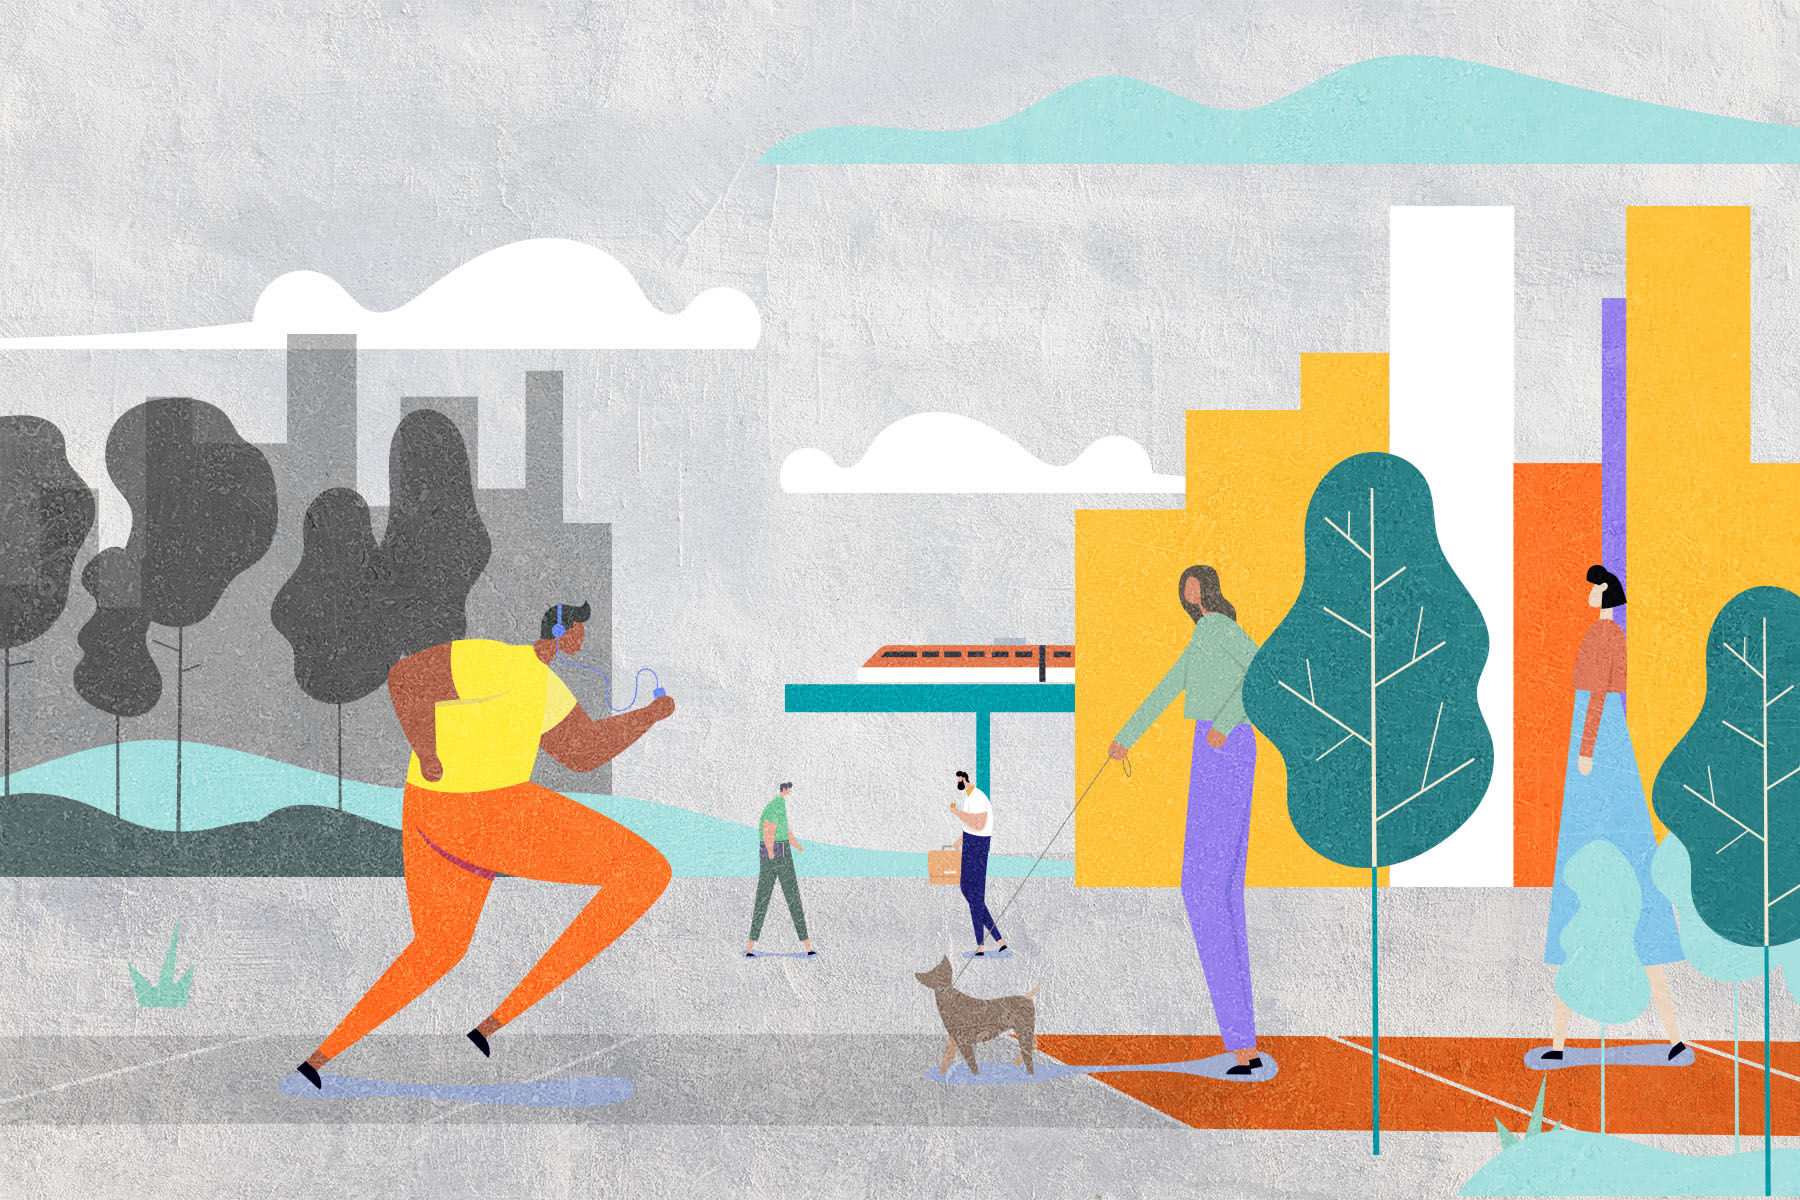 An illustration of cartoon people returning to their daily business: walking the dog, jogging, shopping, partly in colour and partly in grayscale.